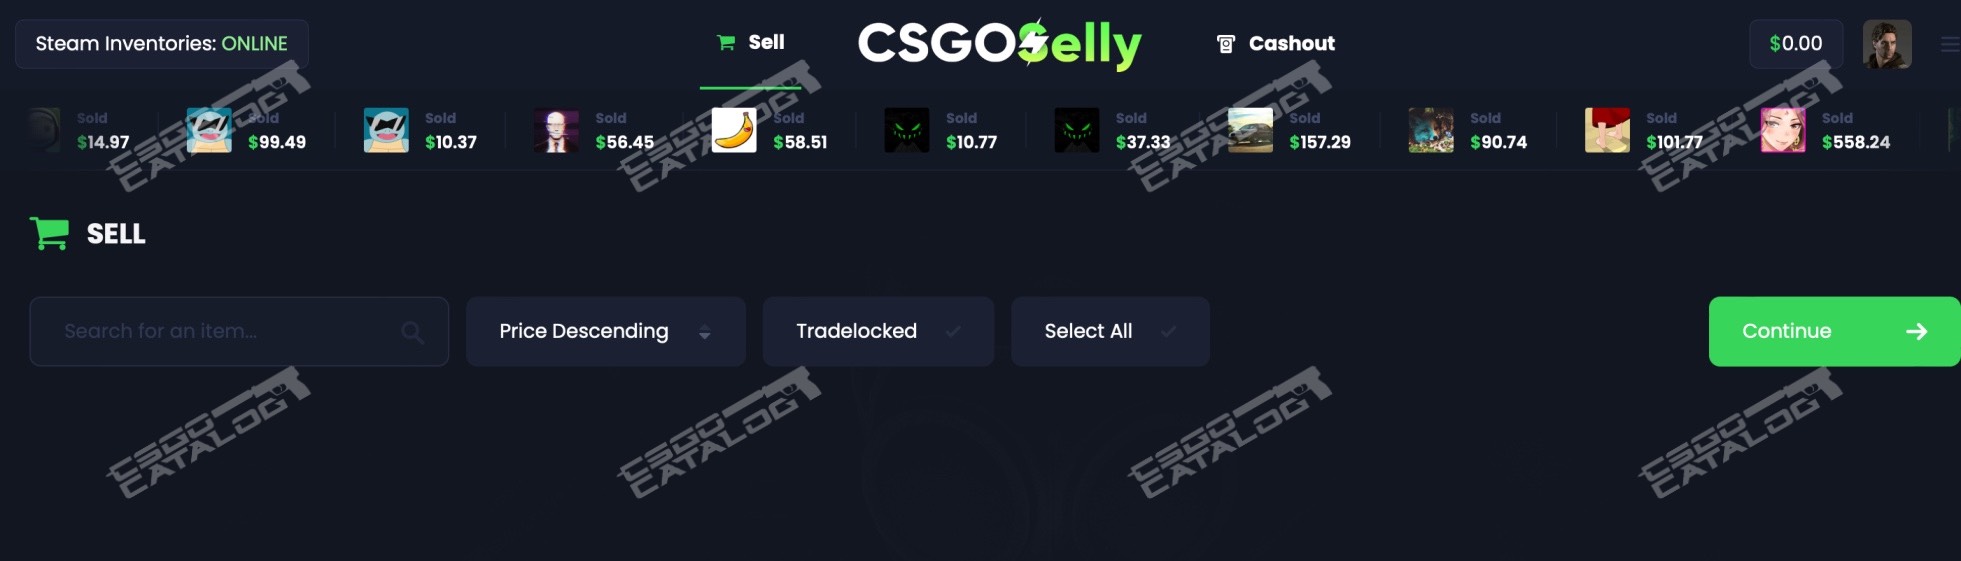 csgoselly review